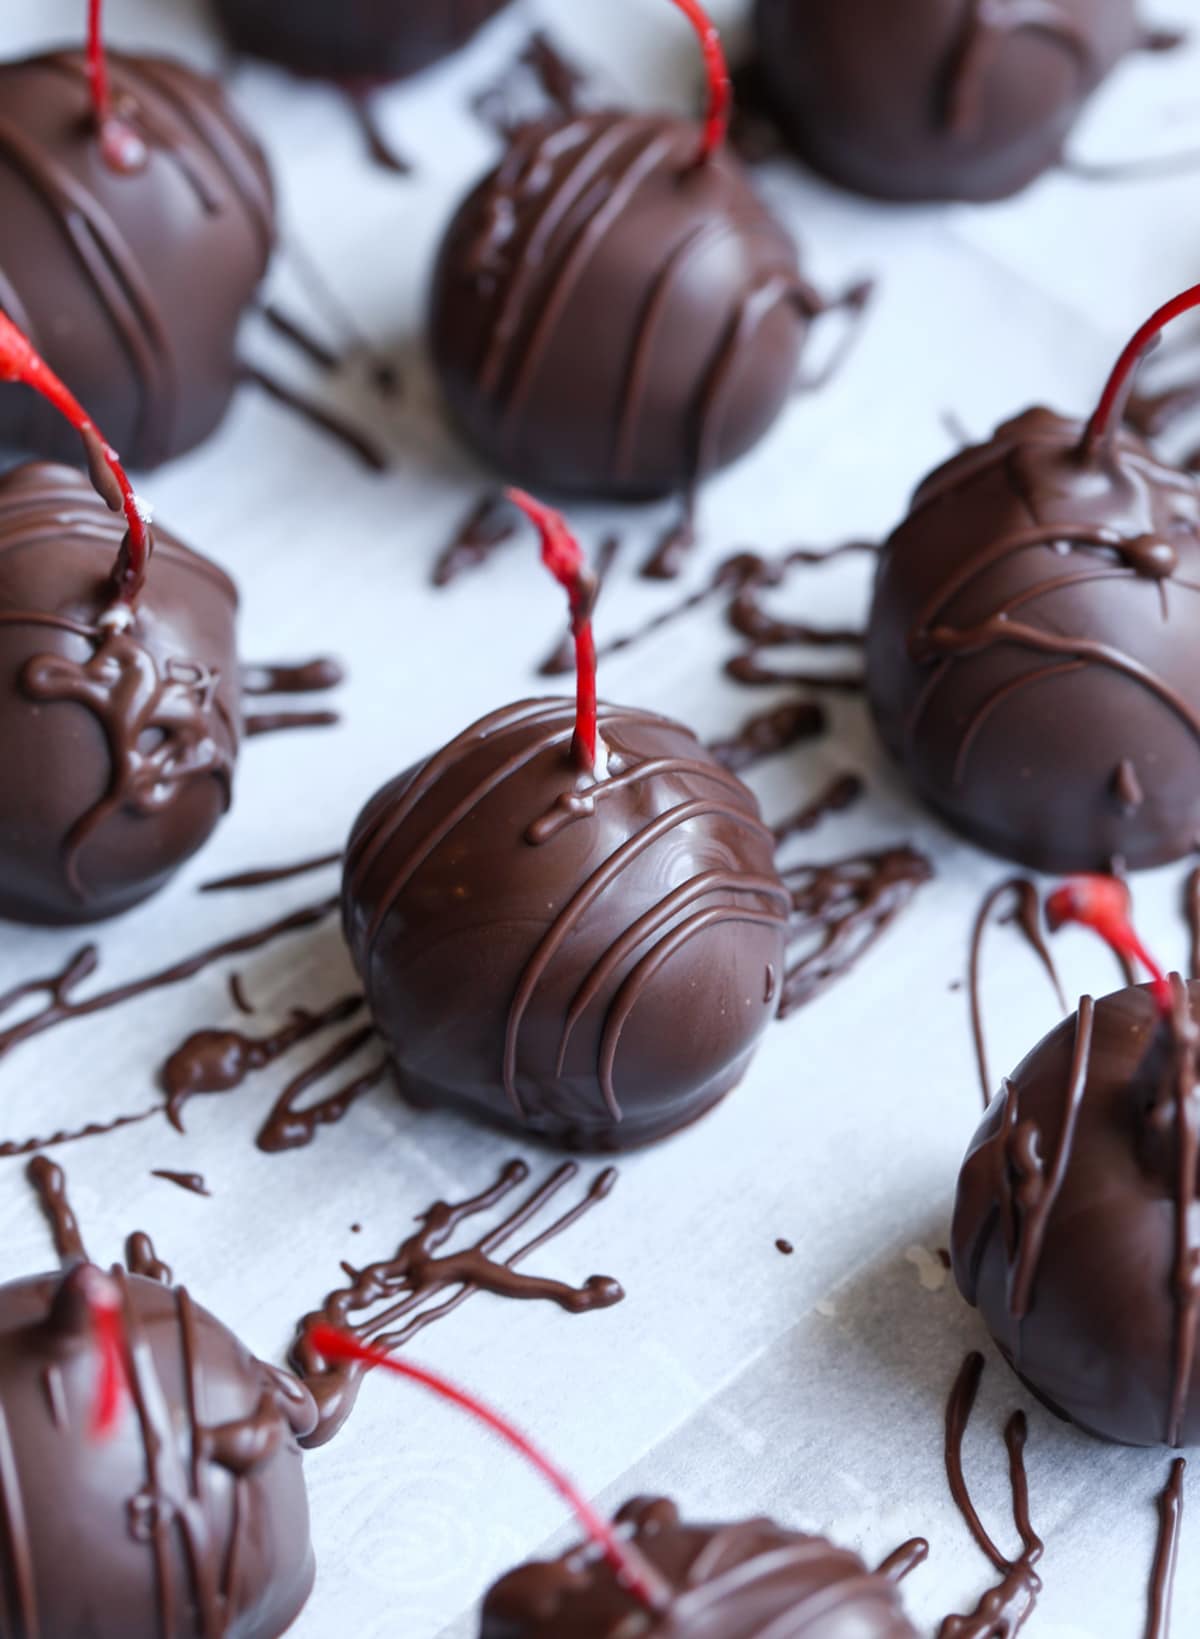 Chocolate covered cherries on a parchment lined baking sheet with drizzled chocolate.